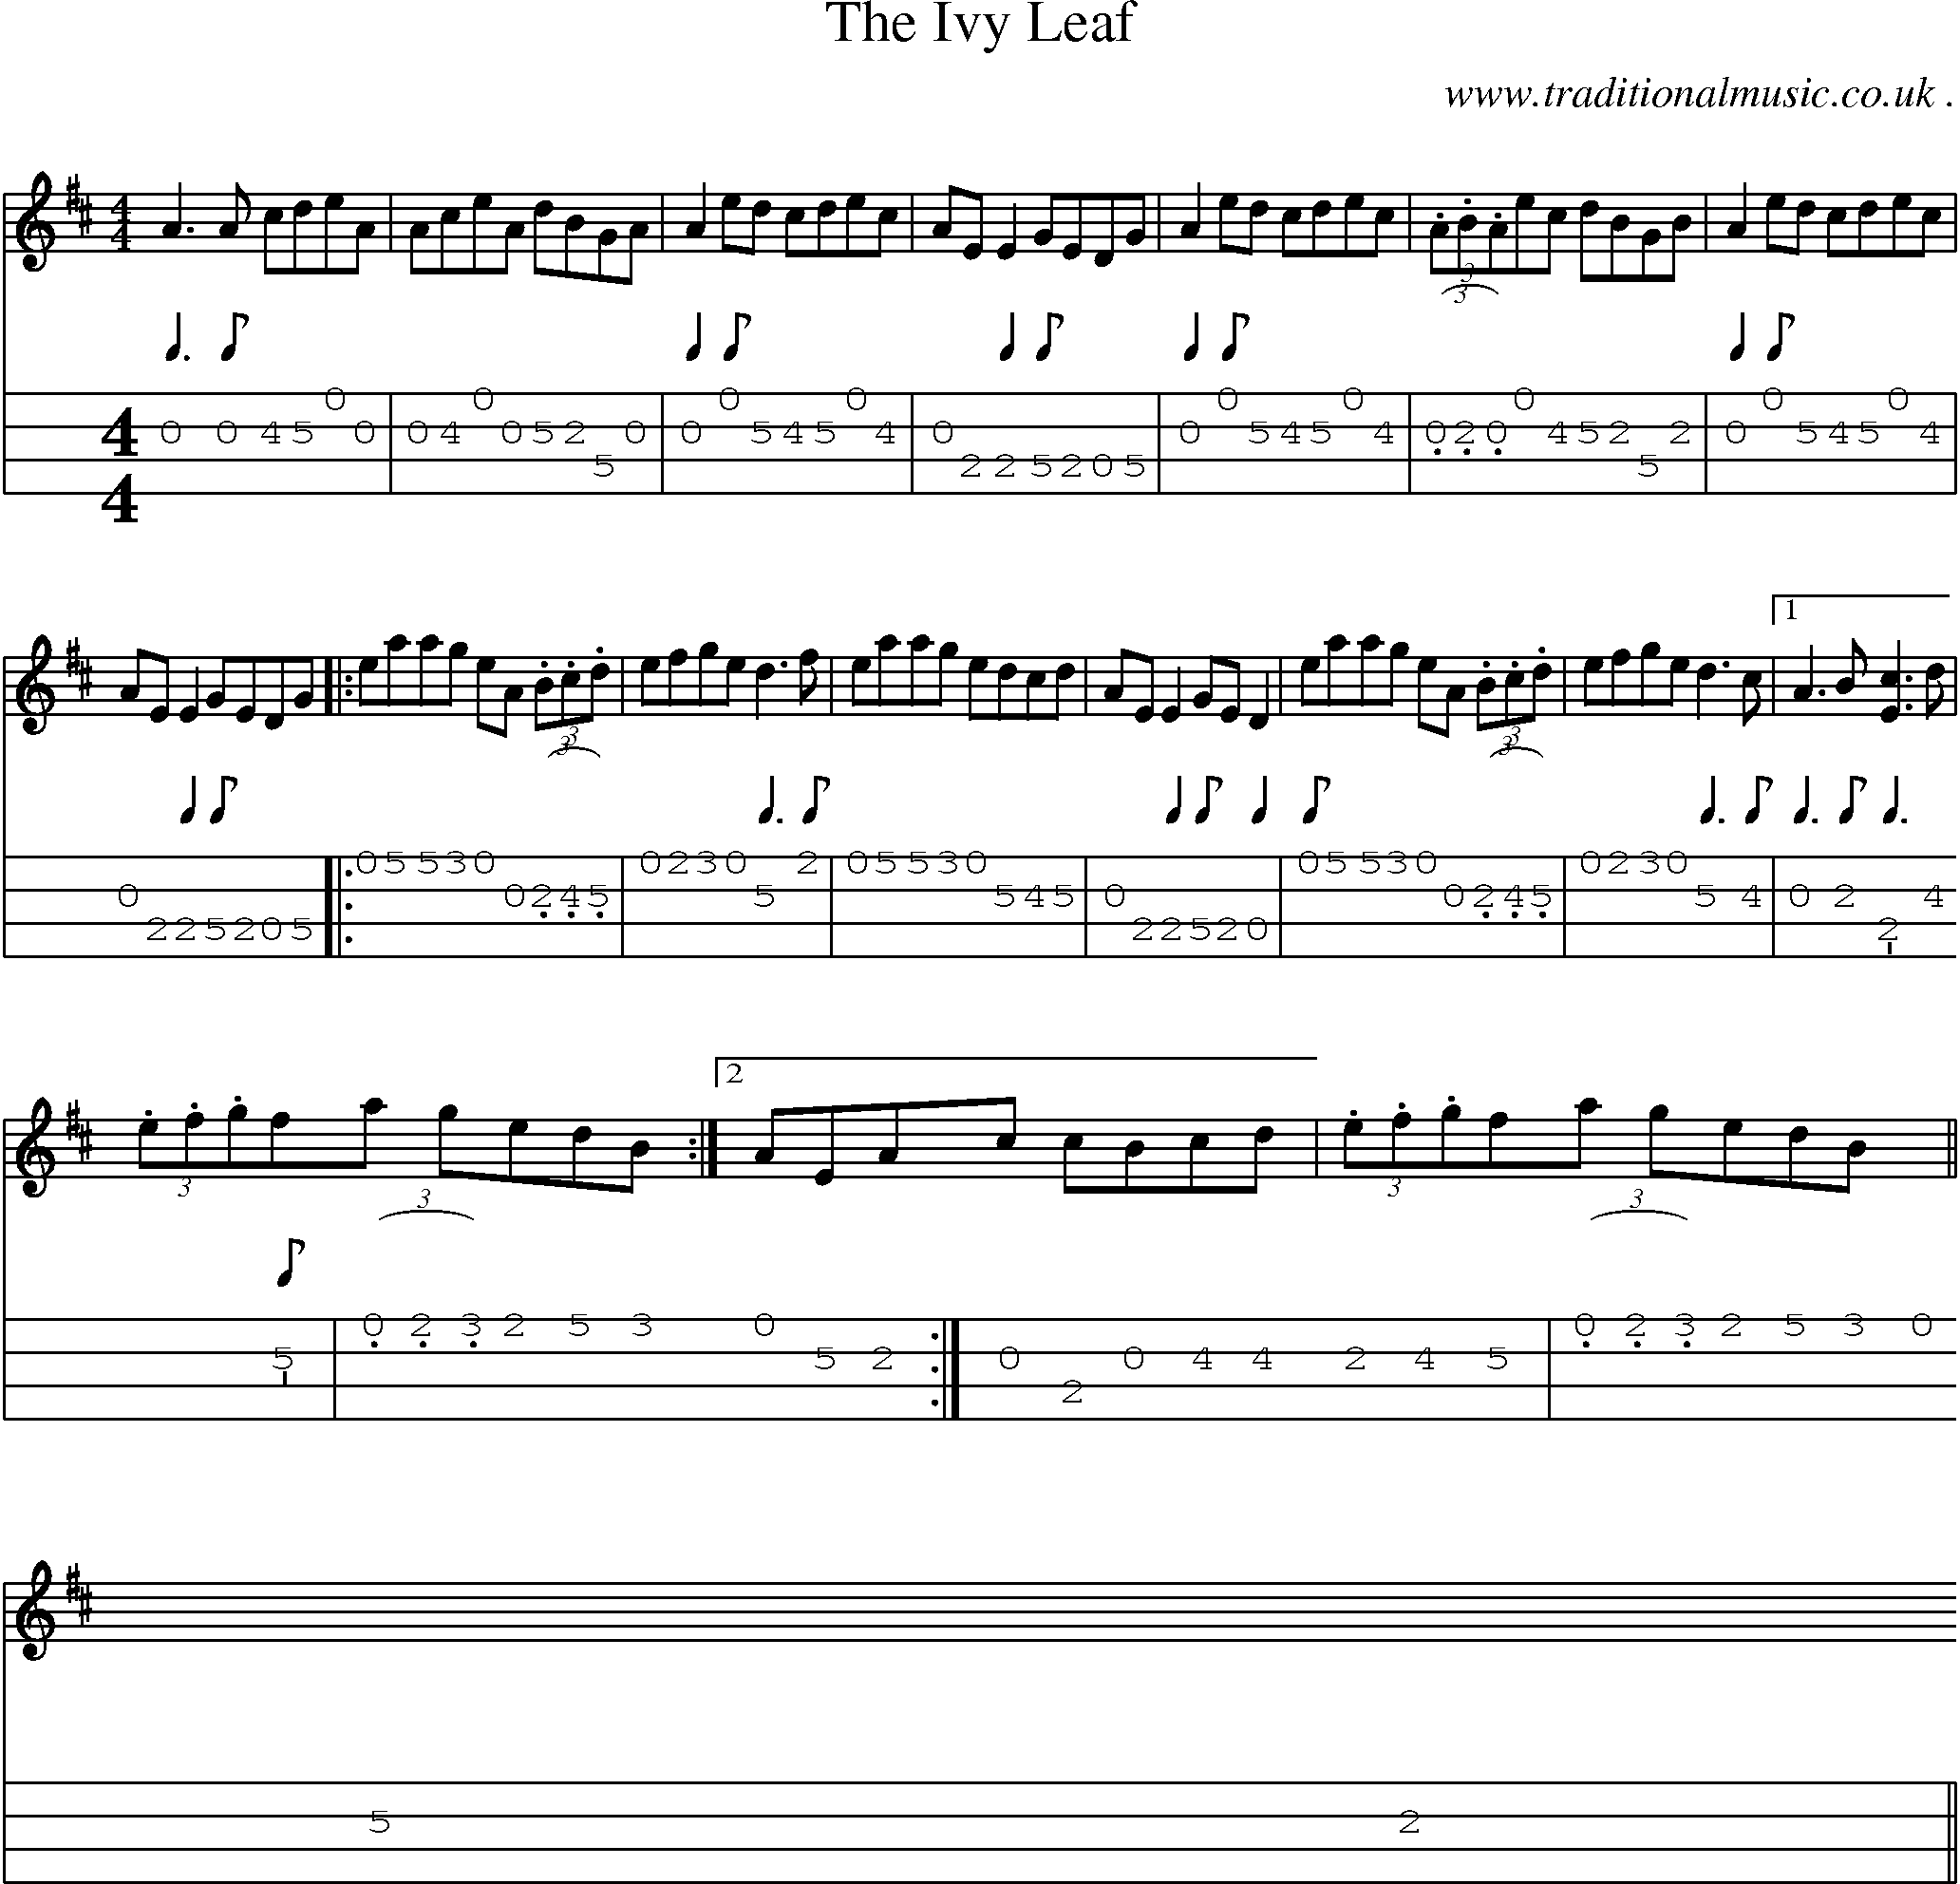 Sheet-Music and Mandolin Tabs for The Ivy Leaf